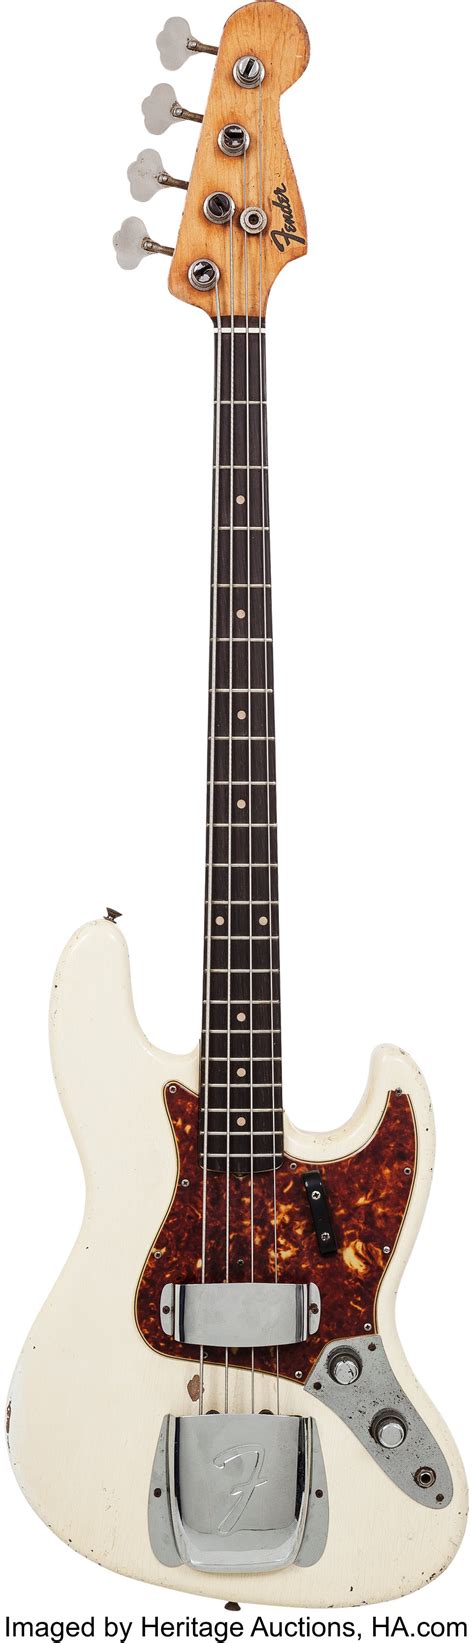 1961 Fender Jazz Bass White Electric Bass Guitar Serial Lot 85086 Heritage Auctions